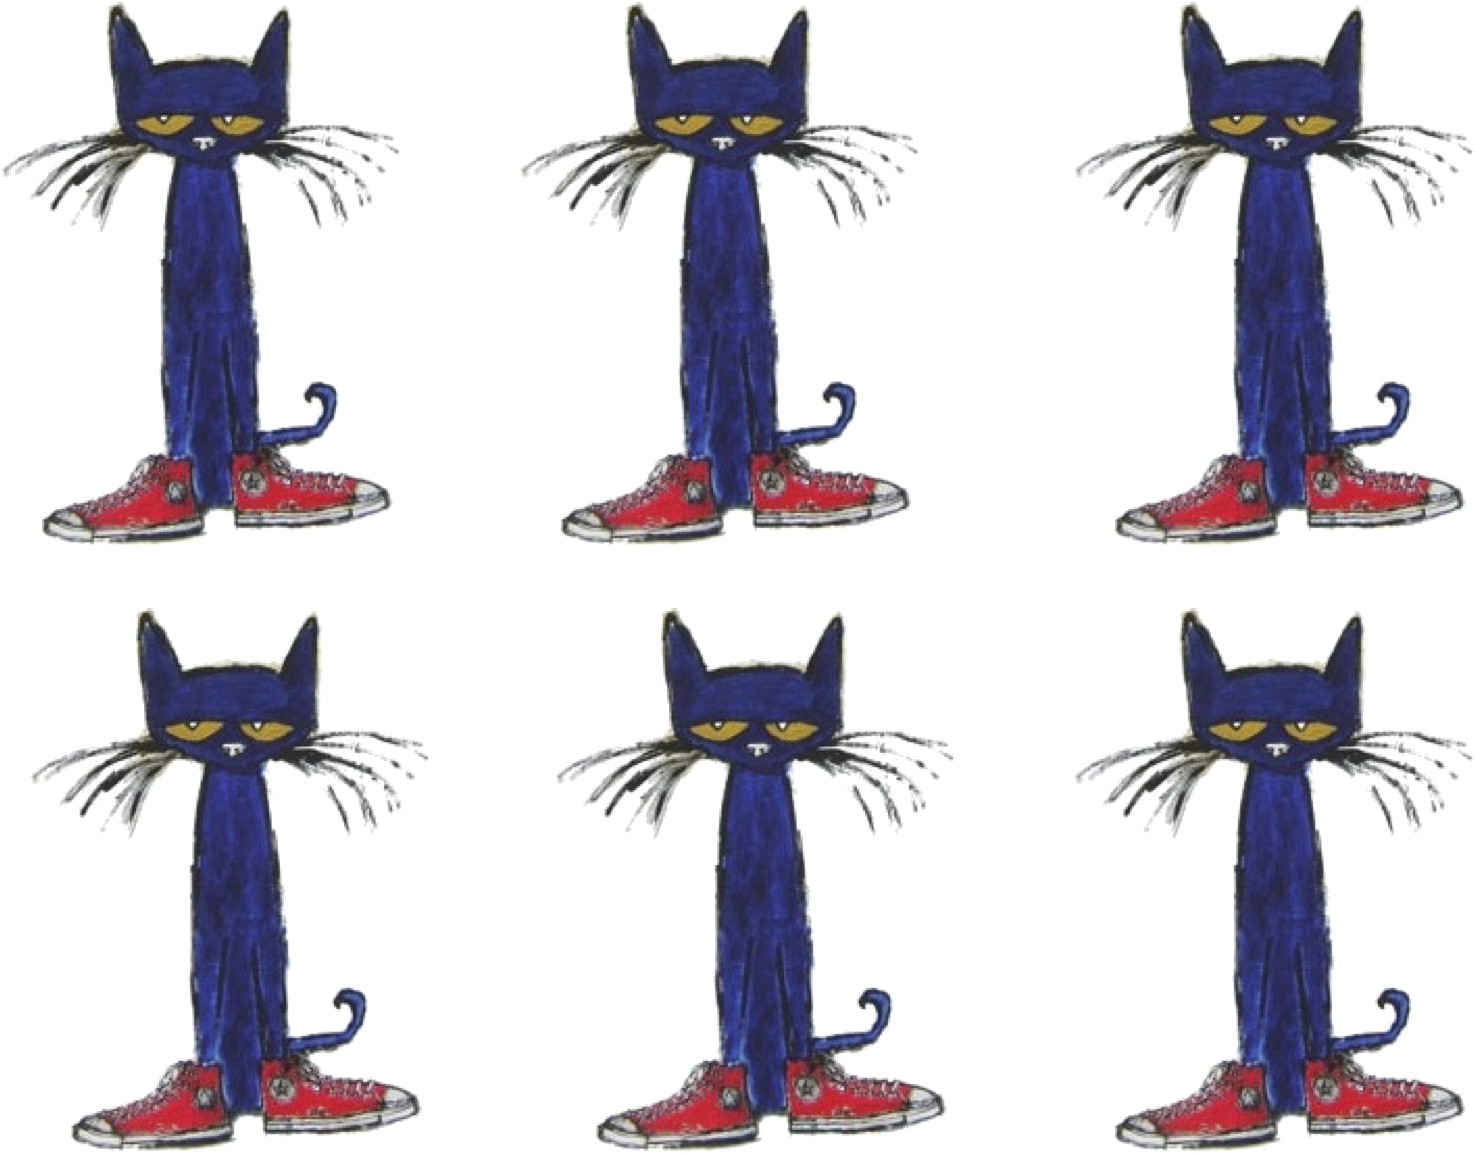 Download Pete The Cat Multiple Poses | Wallpapers.com